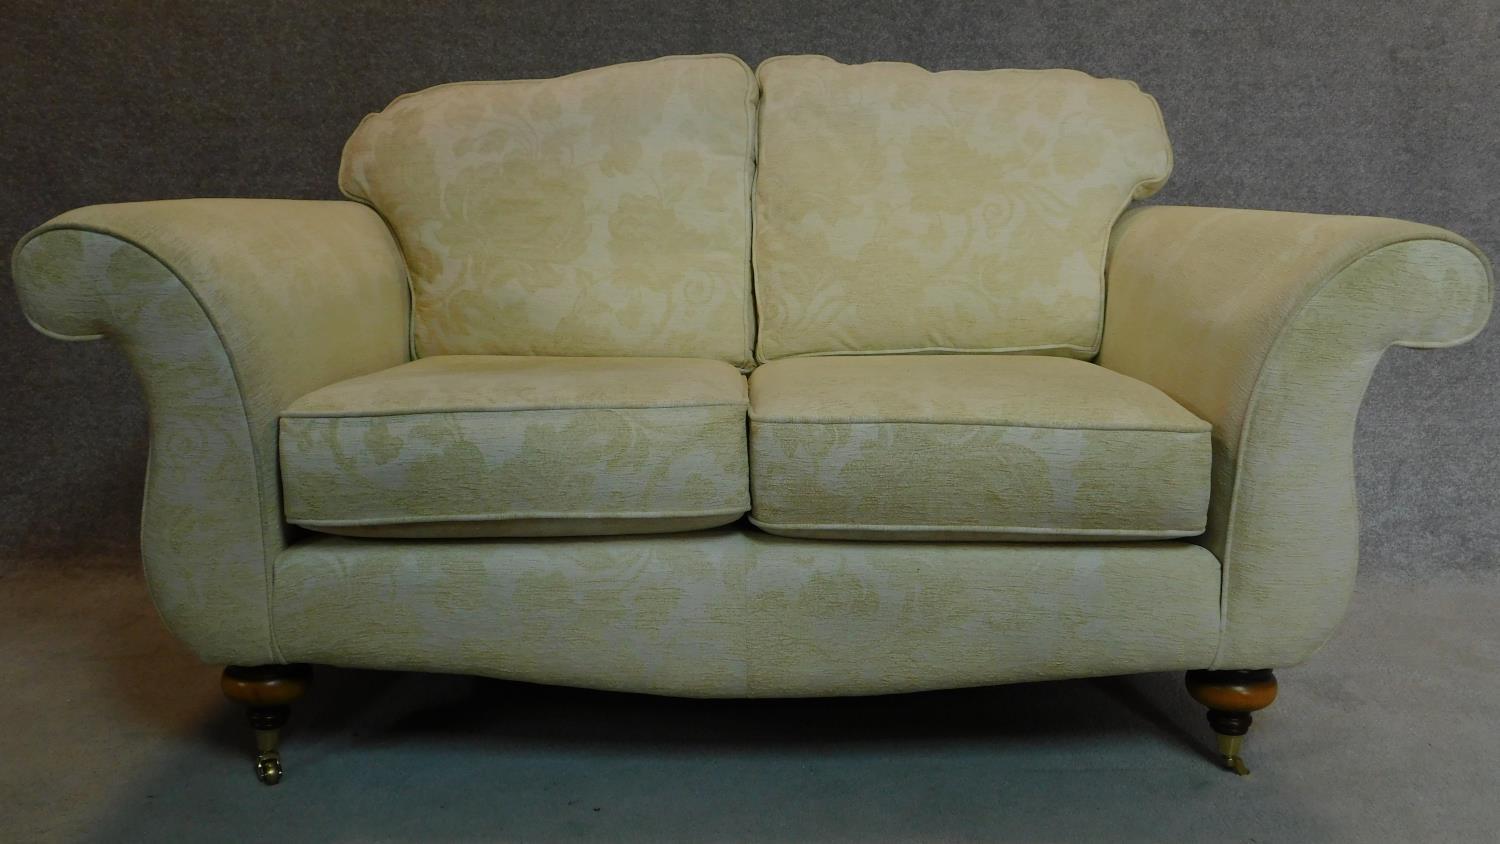 A two seater Victorian style sofa in beige floral upholstery and mahogany turned feet terminating in - Image 2 of 5